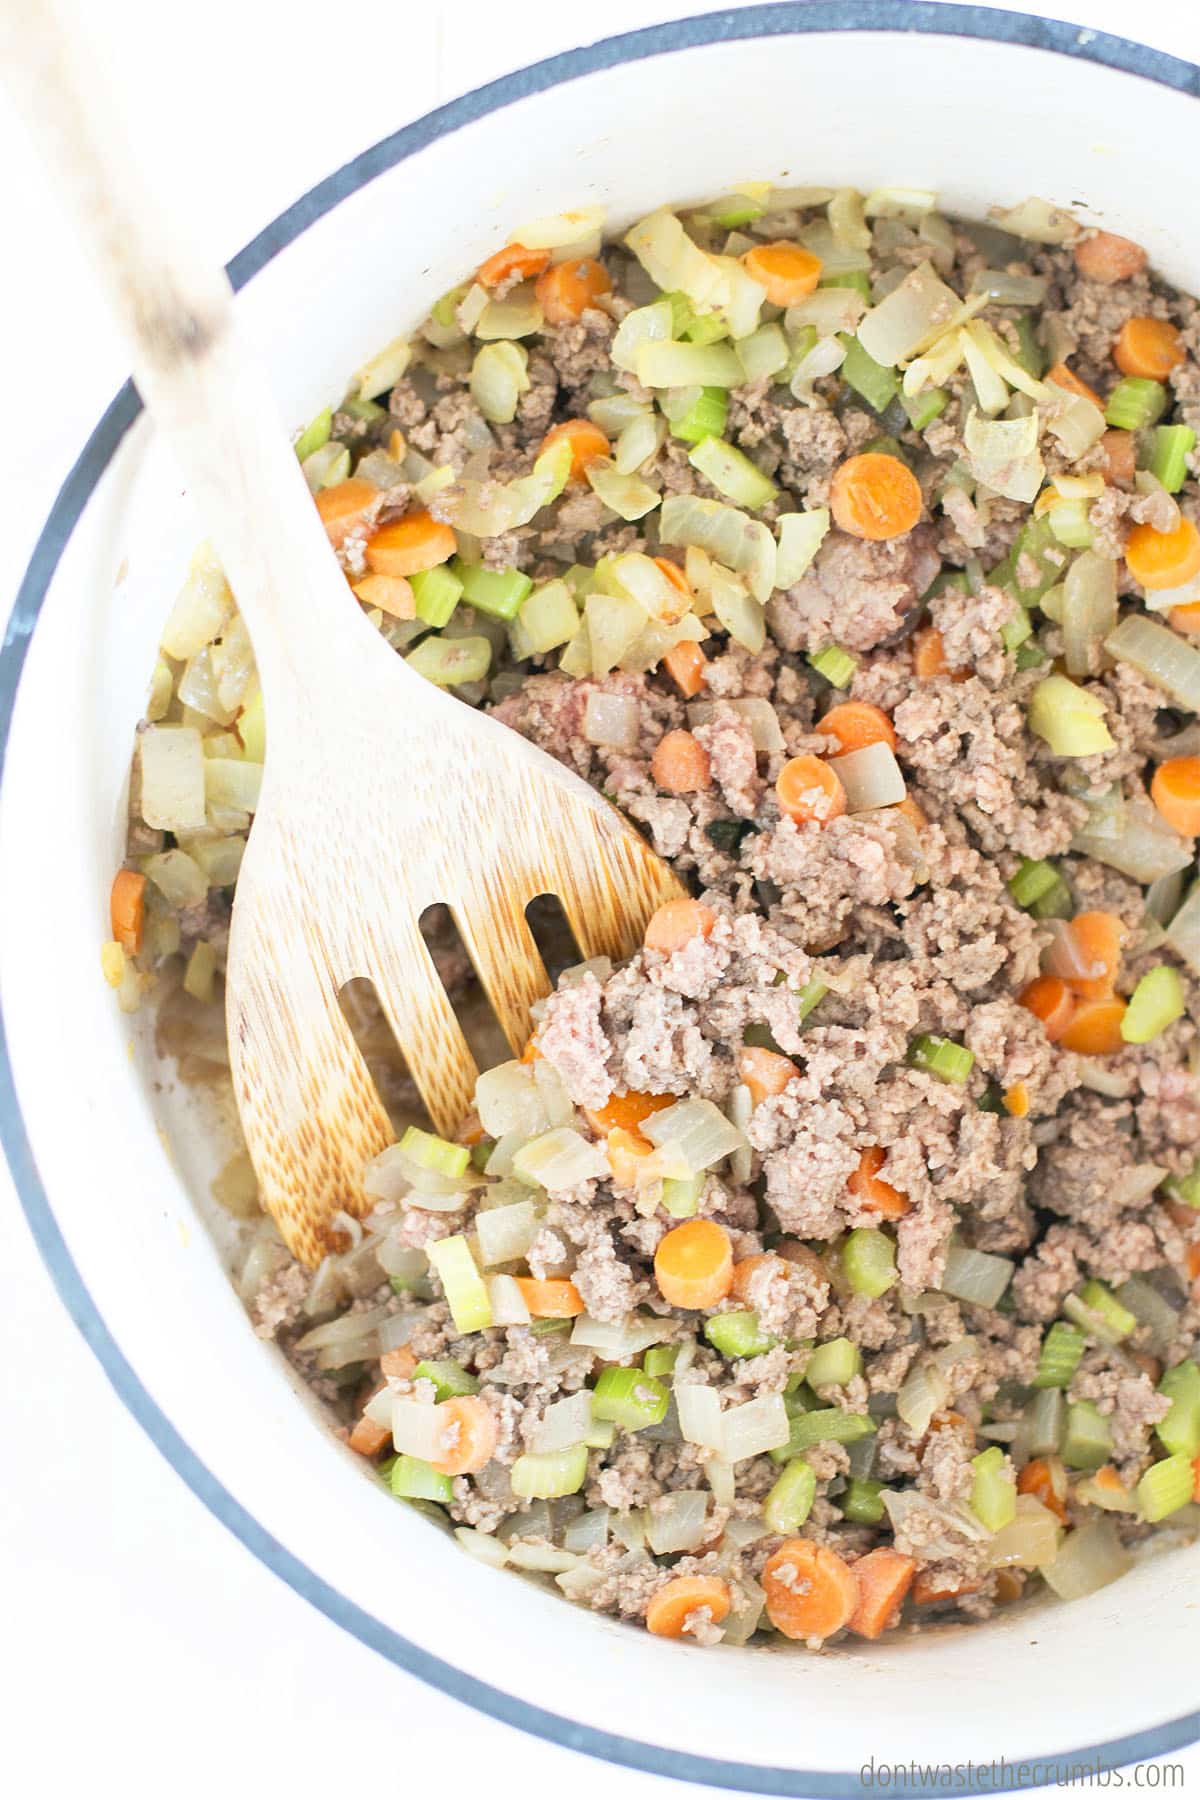 Large pot with ground beef and veggies, there is a wooden spatula stirring the mixture that makes cheeseburger soup.